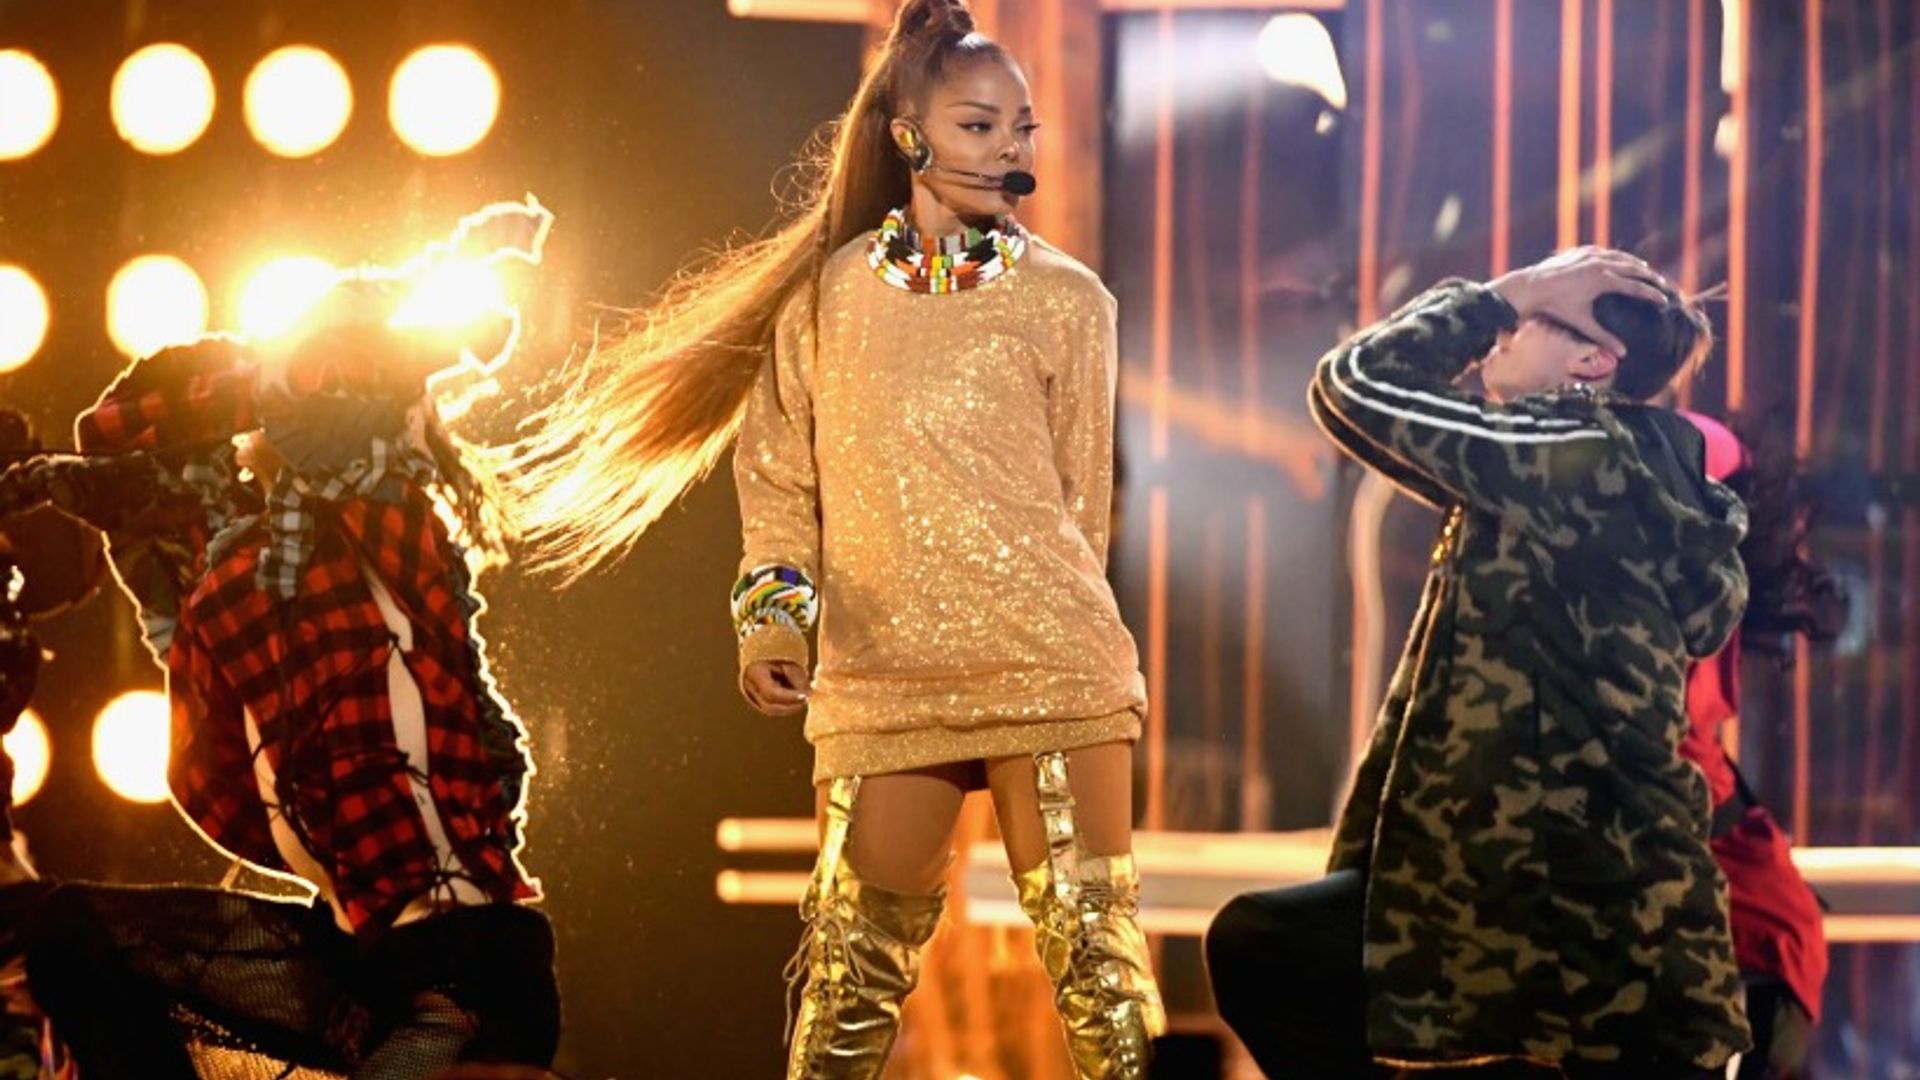 Janet Jackson, is that you? Singer stuns in her 50s at the Billboard Music Awards